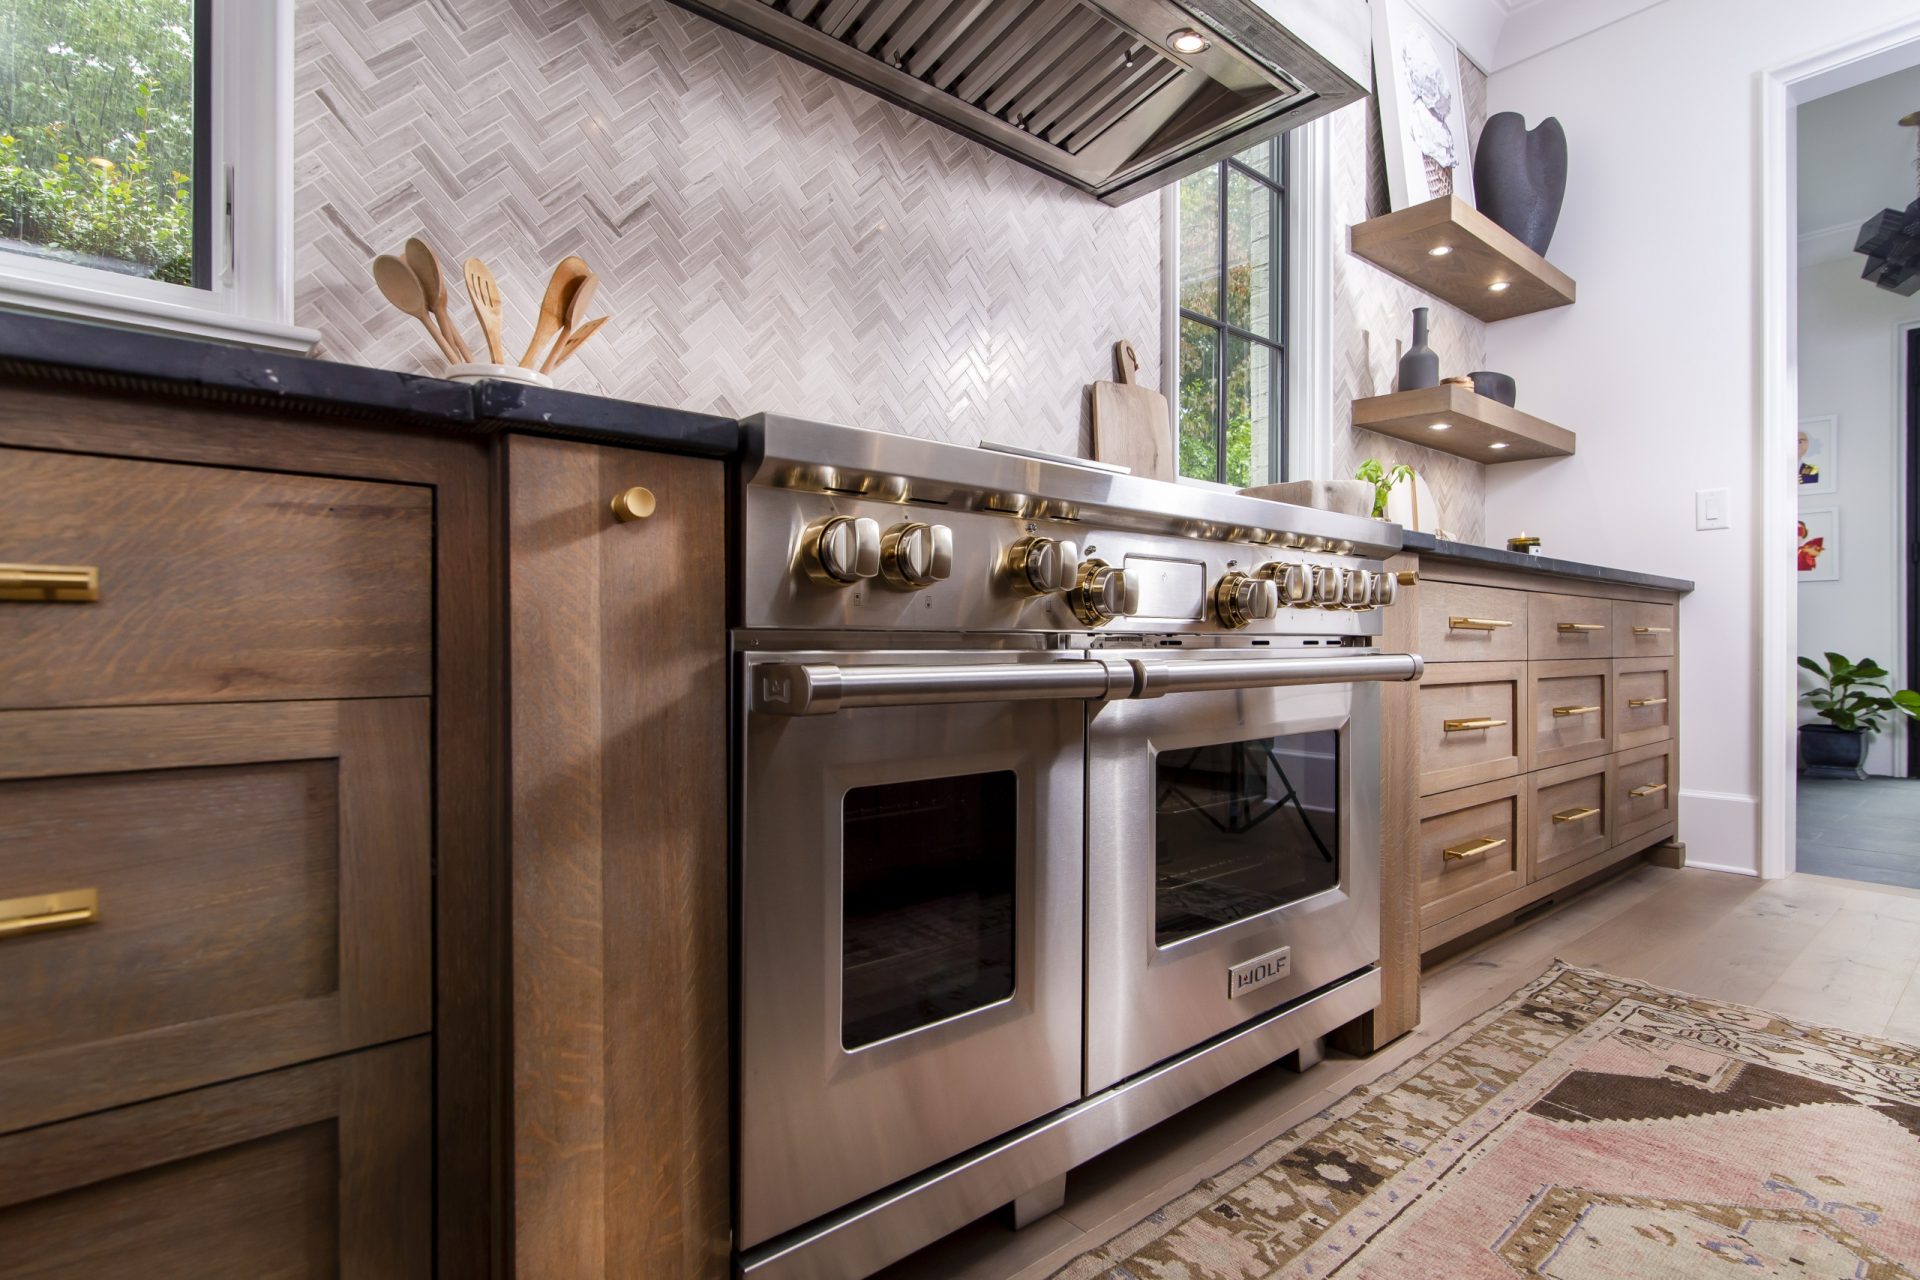 quarter sawn white oak kitchen cabinets with brass hardware and stainless steel kitchen stove with range hood